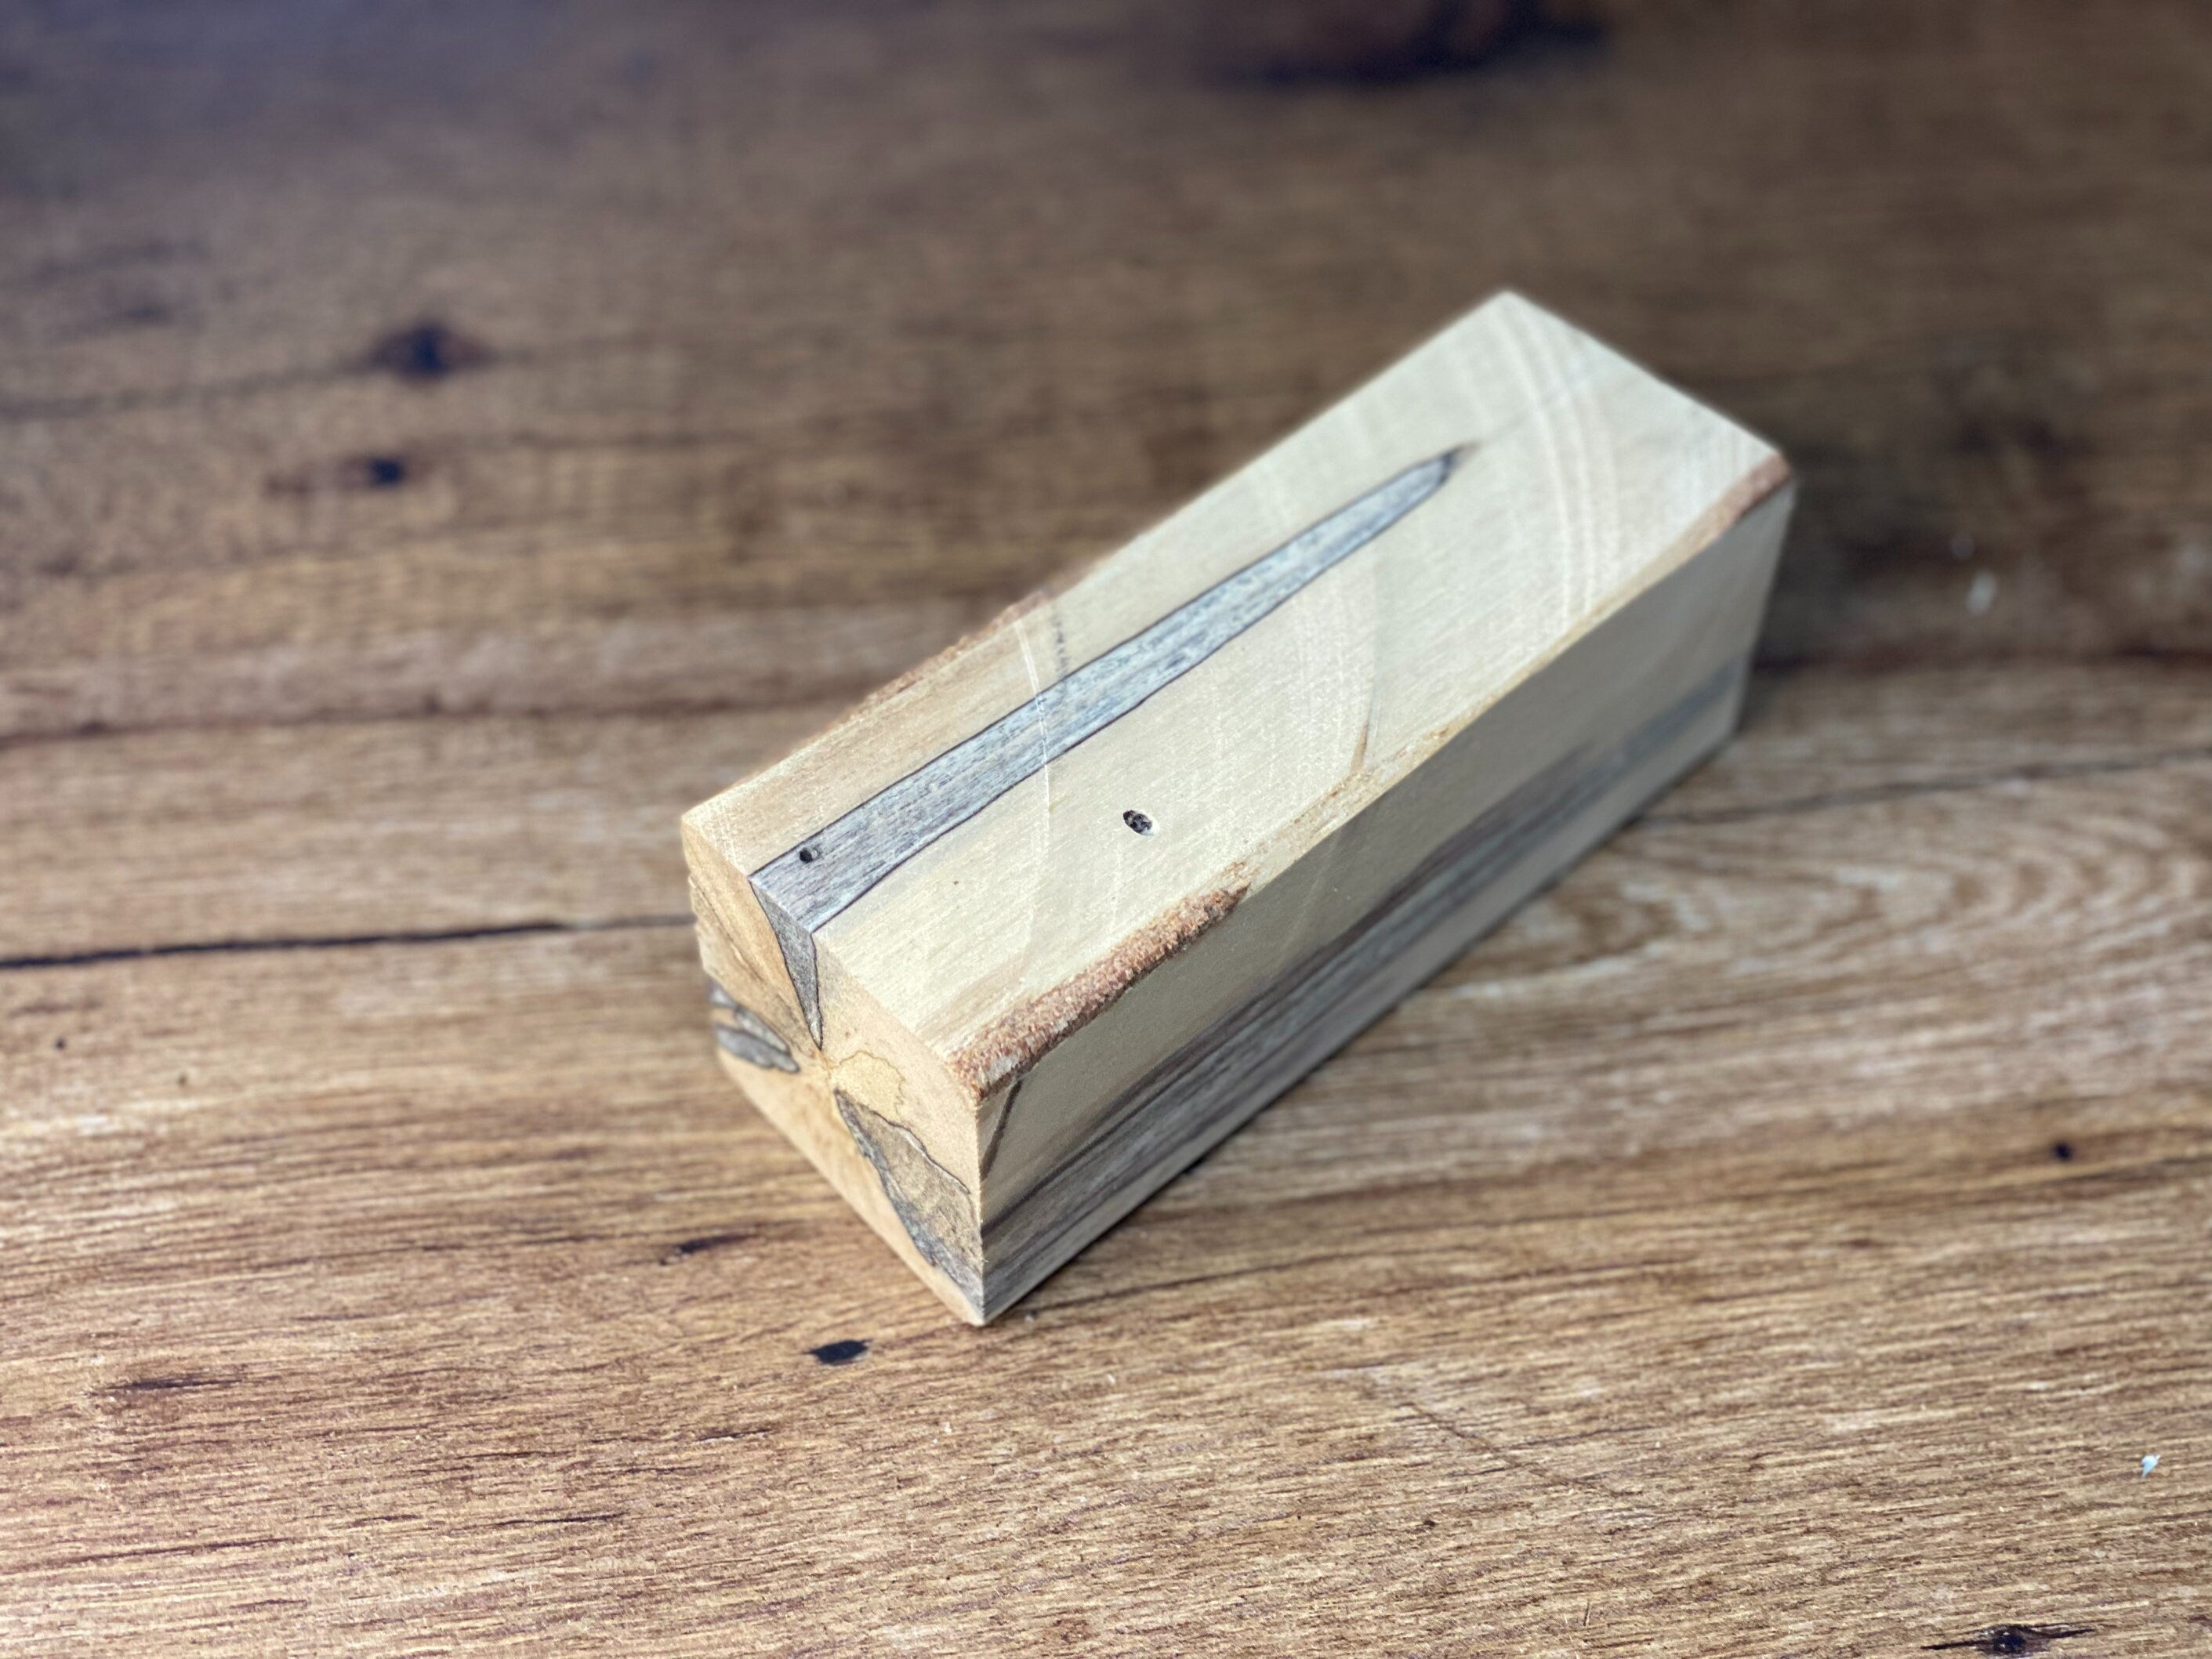 Spalted Hickory Burl Blank, Burl Block, Rectangular Prism, Approximately 5.5 Inches Long by 2 Inches Wide and 2 Inches High